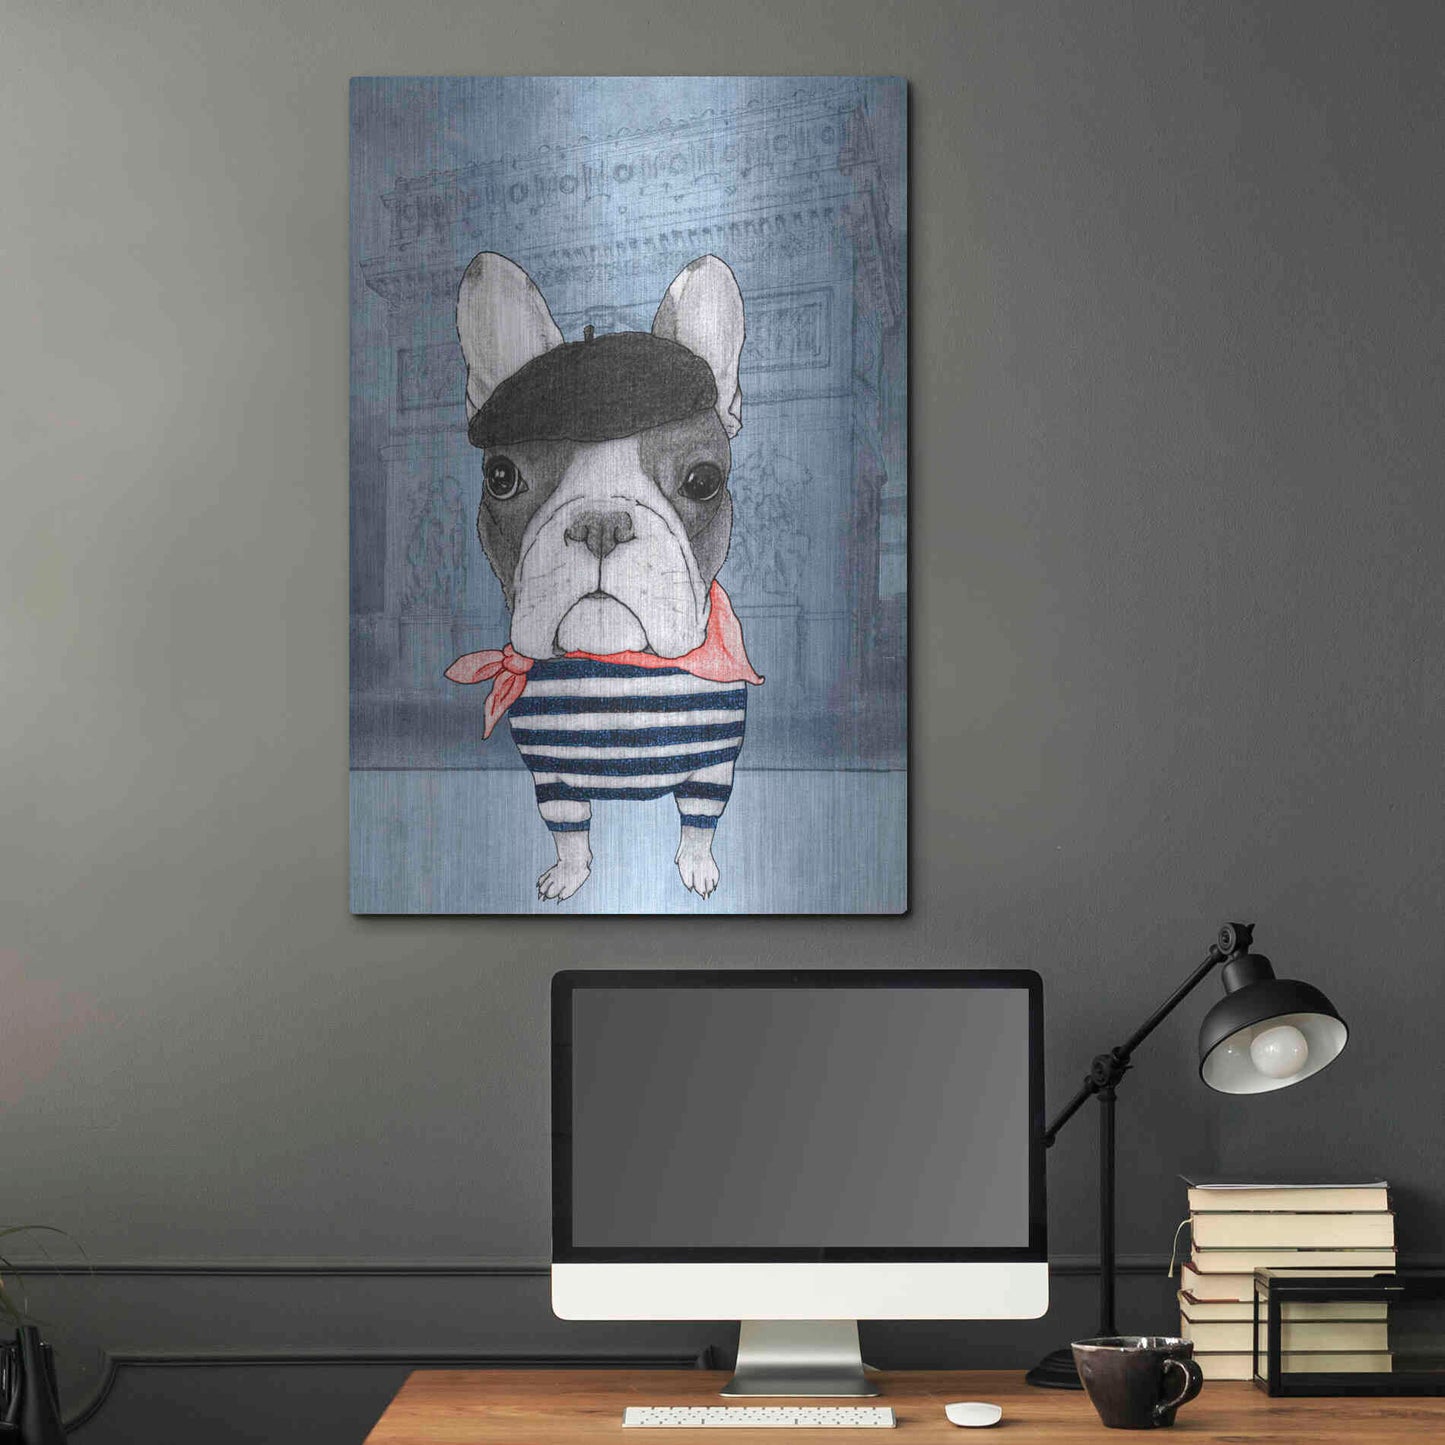 Luxe Metal Art 'French Bulldog with Arc de Triomphe' by Barruf Metal Wall Art,24x36